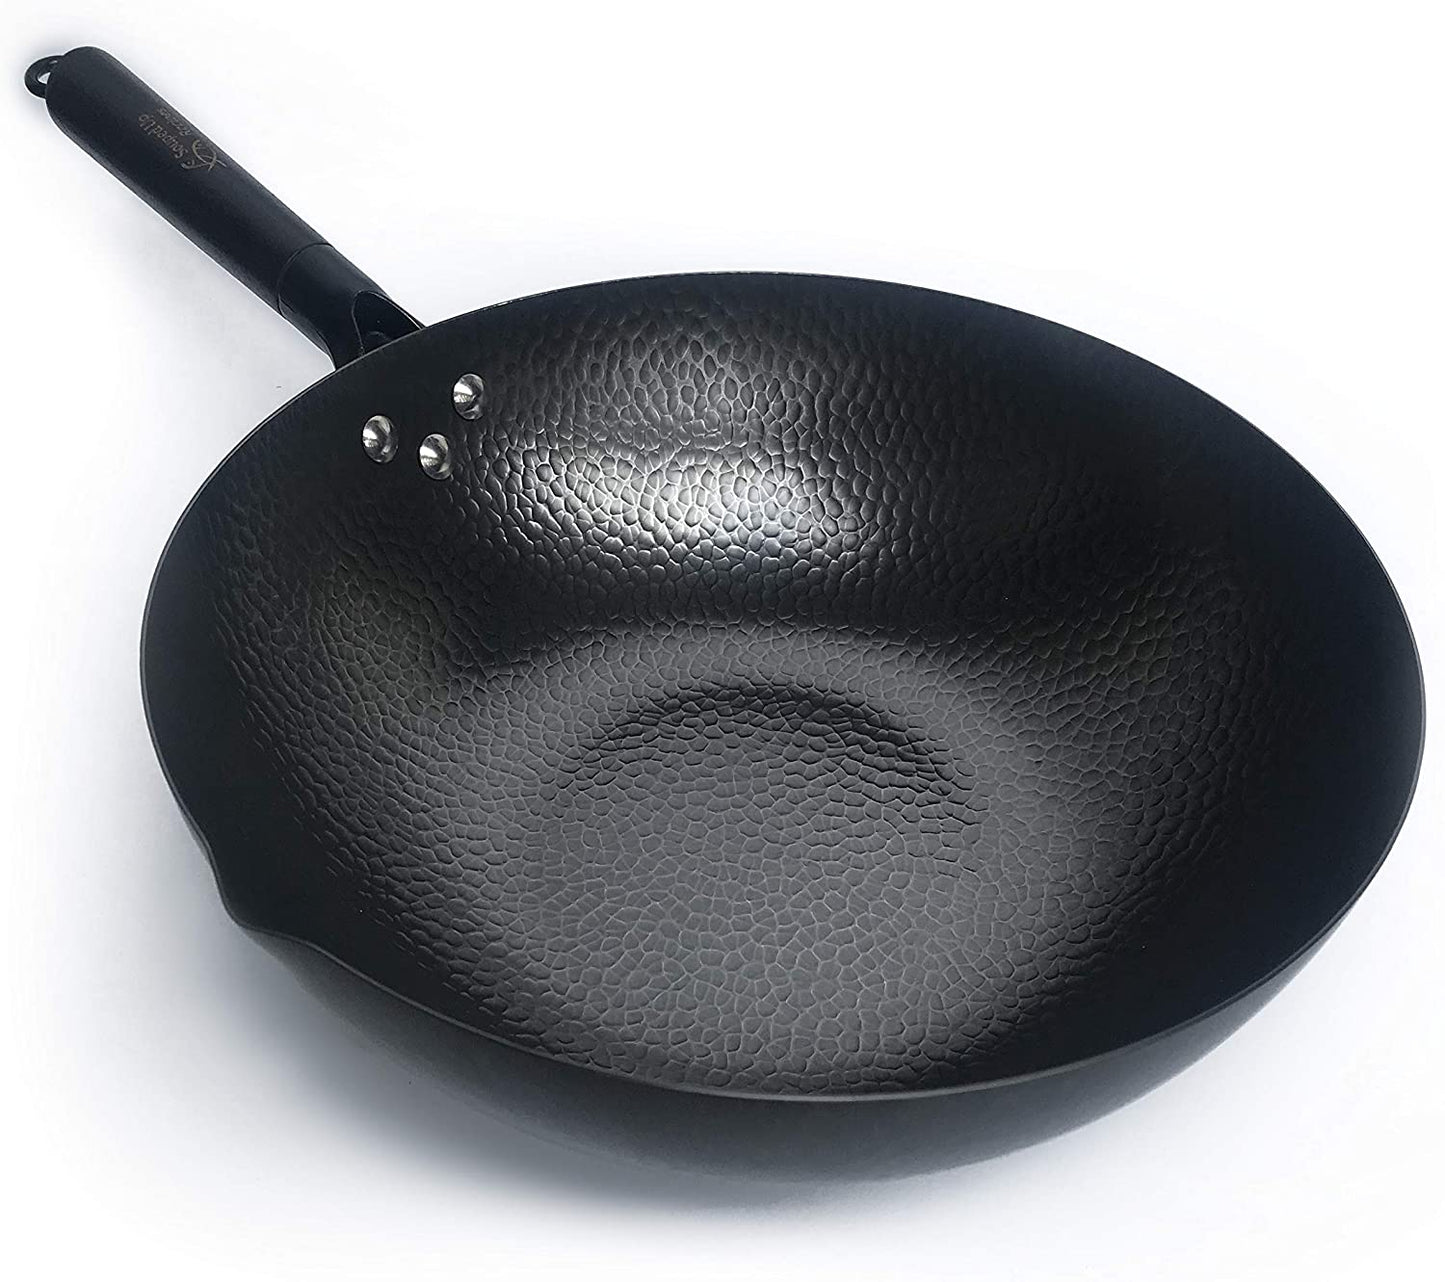 Carbon Steel Wok - Works on Electric, Gas and Induction Stoves!